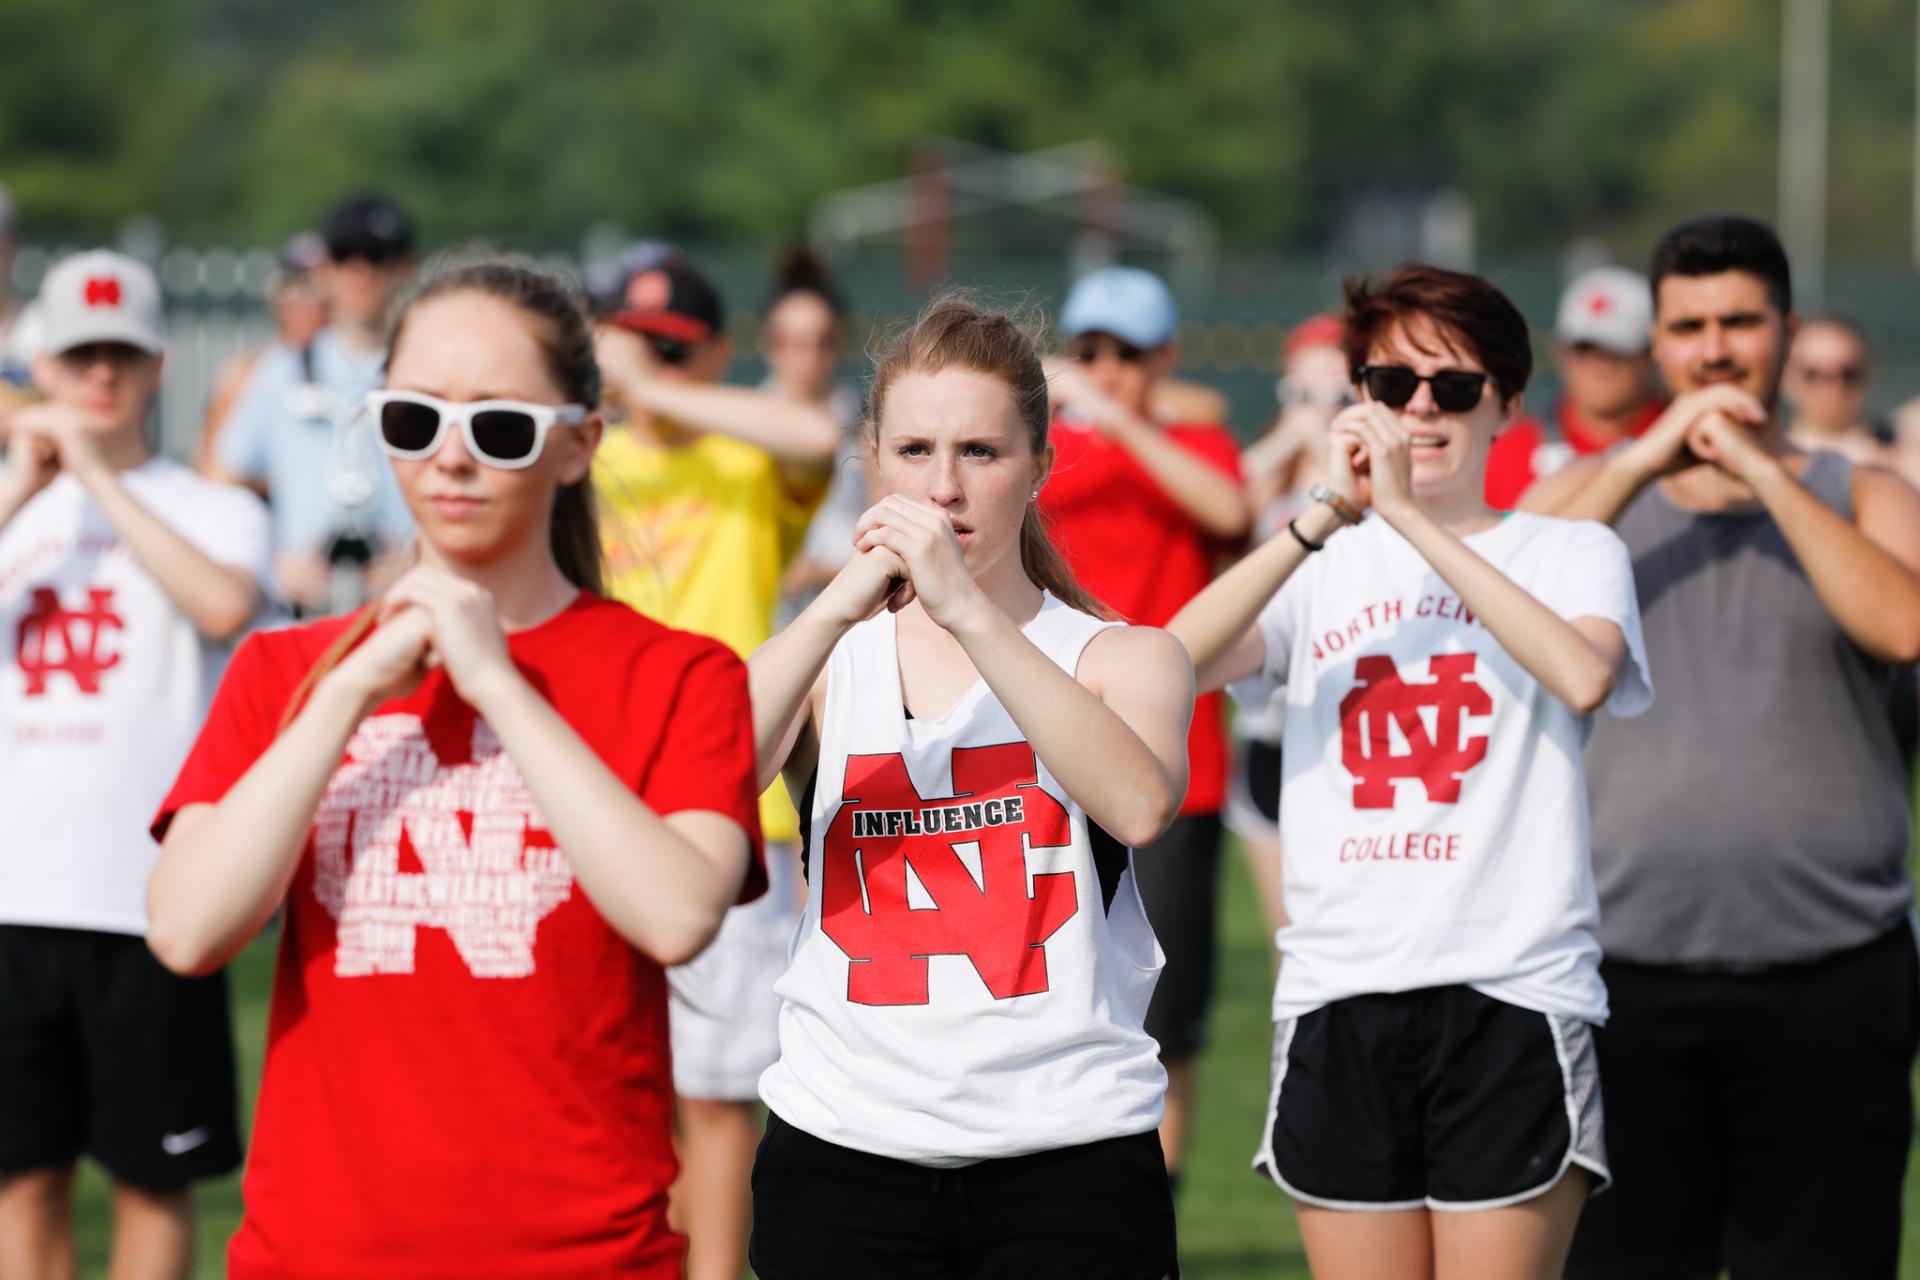 North Central College's marching band has countless practices to deliver the best performance